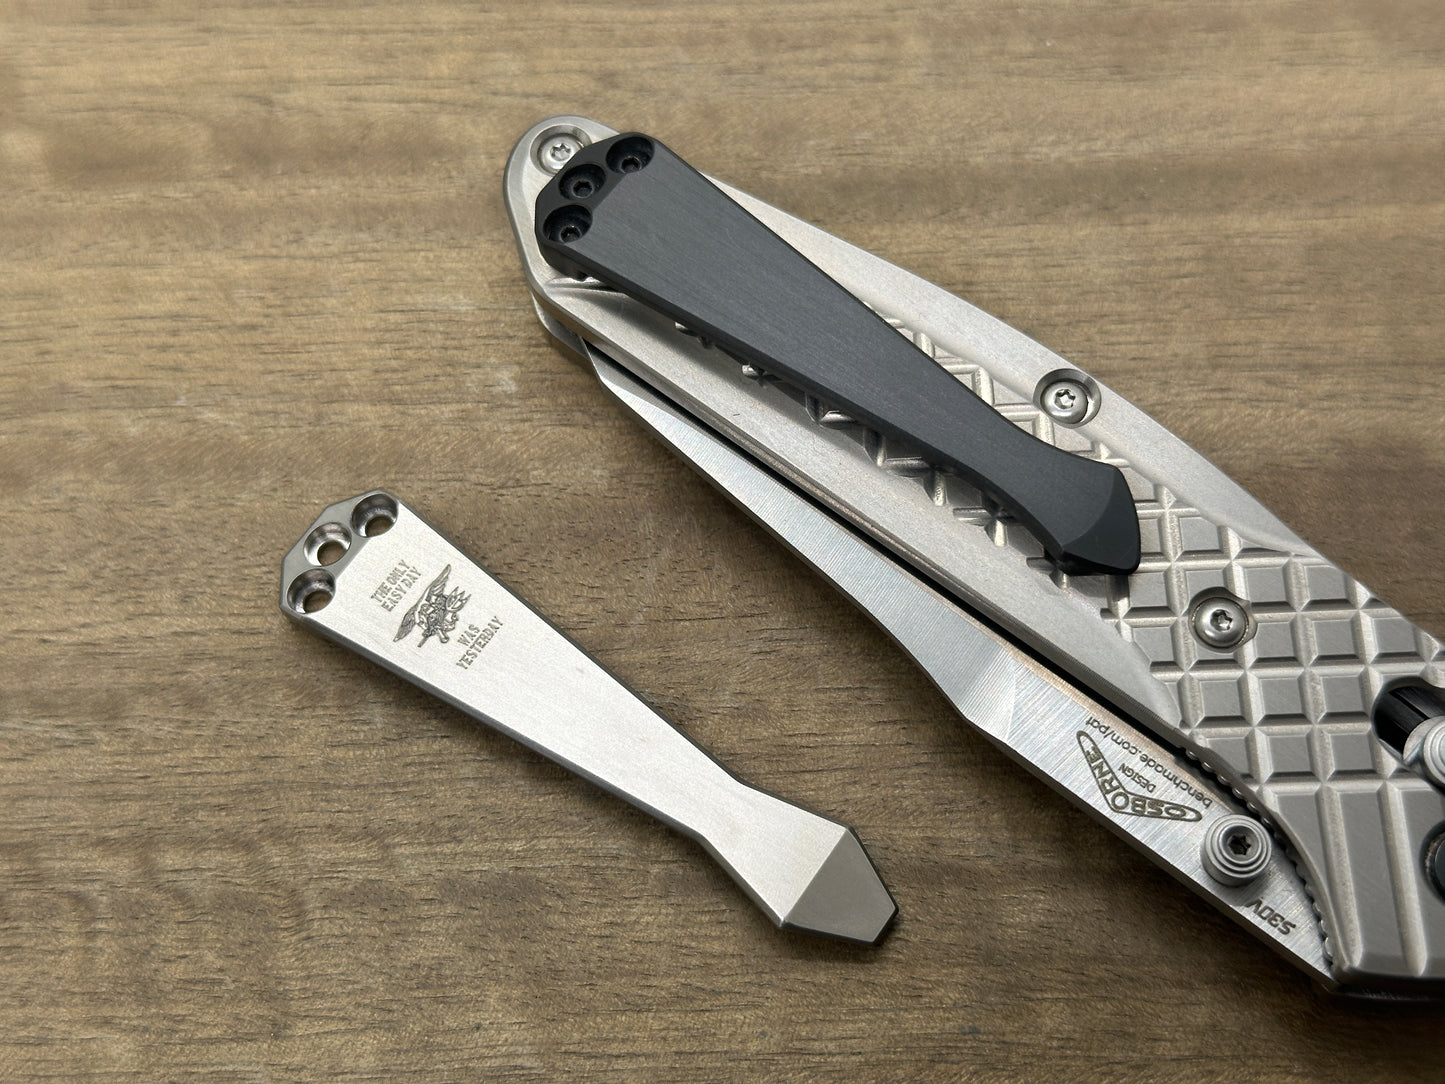 US NAVY Seals "The only easy Day was Yesterday" Dmd Titanium CLIP for Benchmade